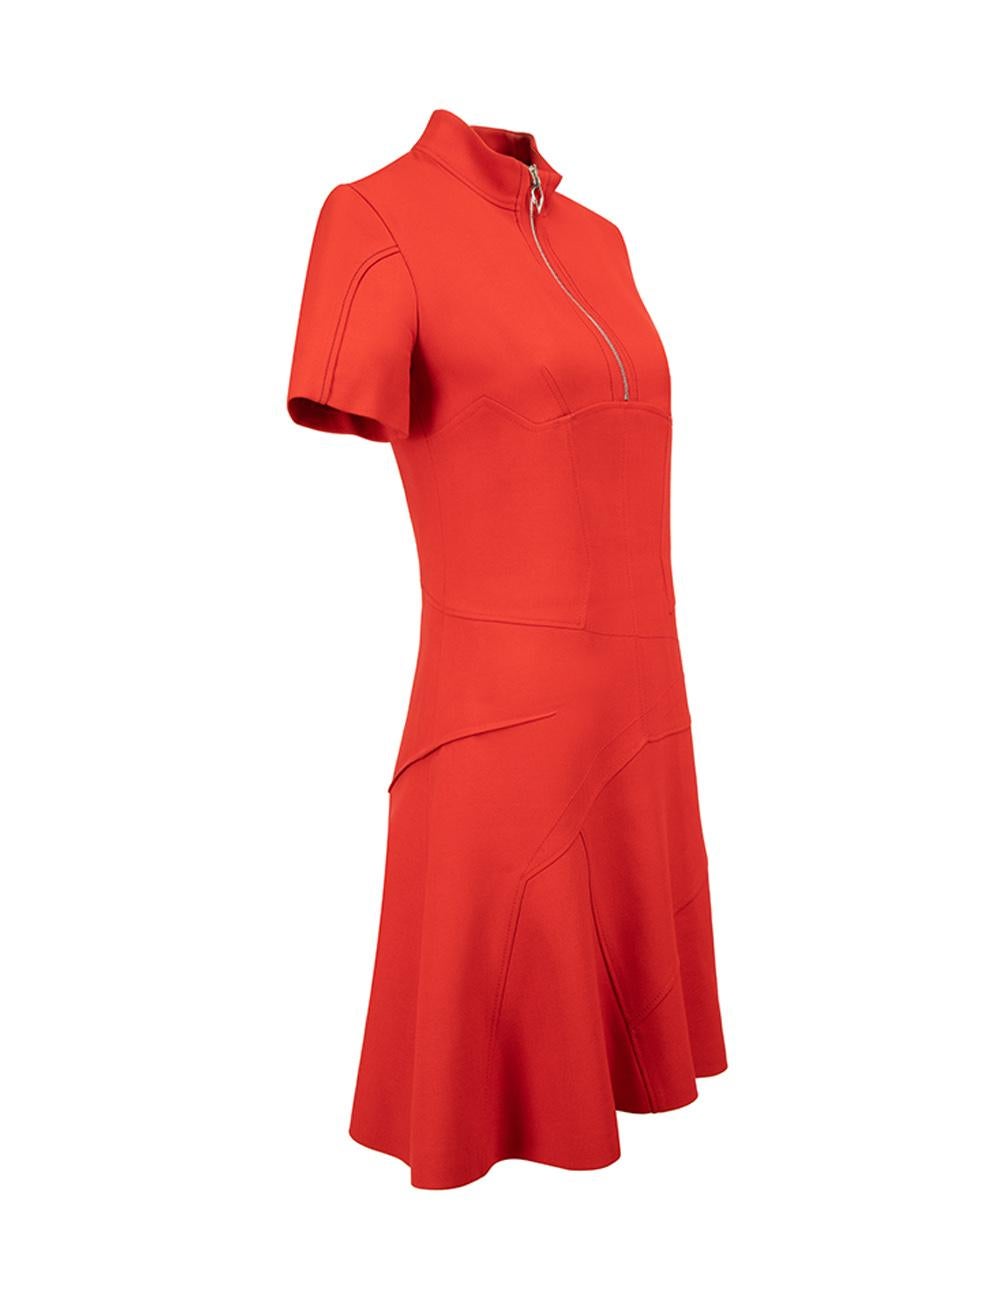 CONDITION is Good. Minor wear to dress is evident. Light wear to the neckline lining with lightening of the fabric, there are also marks down the front on this used Christian Dior designer resale item.



Details


Red

Synthetic

Mini dress

Short